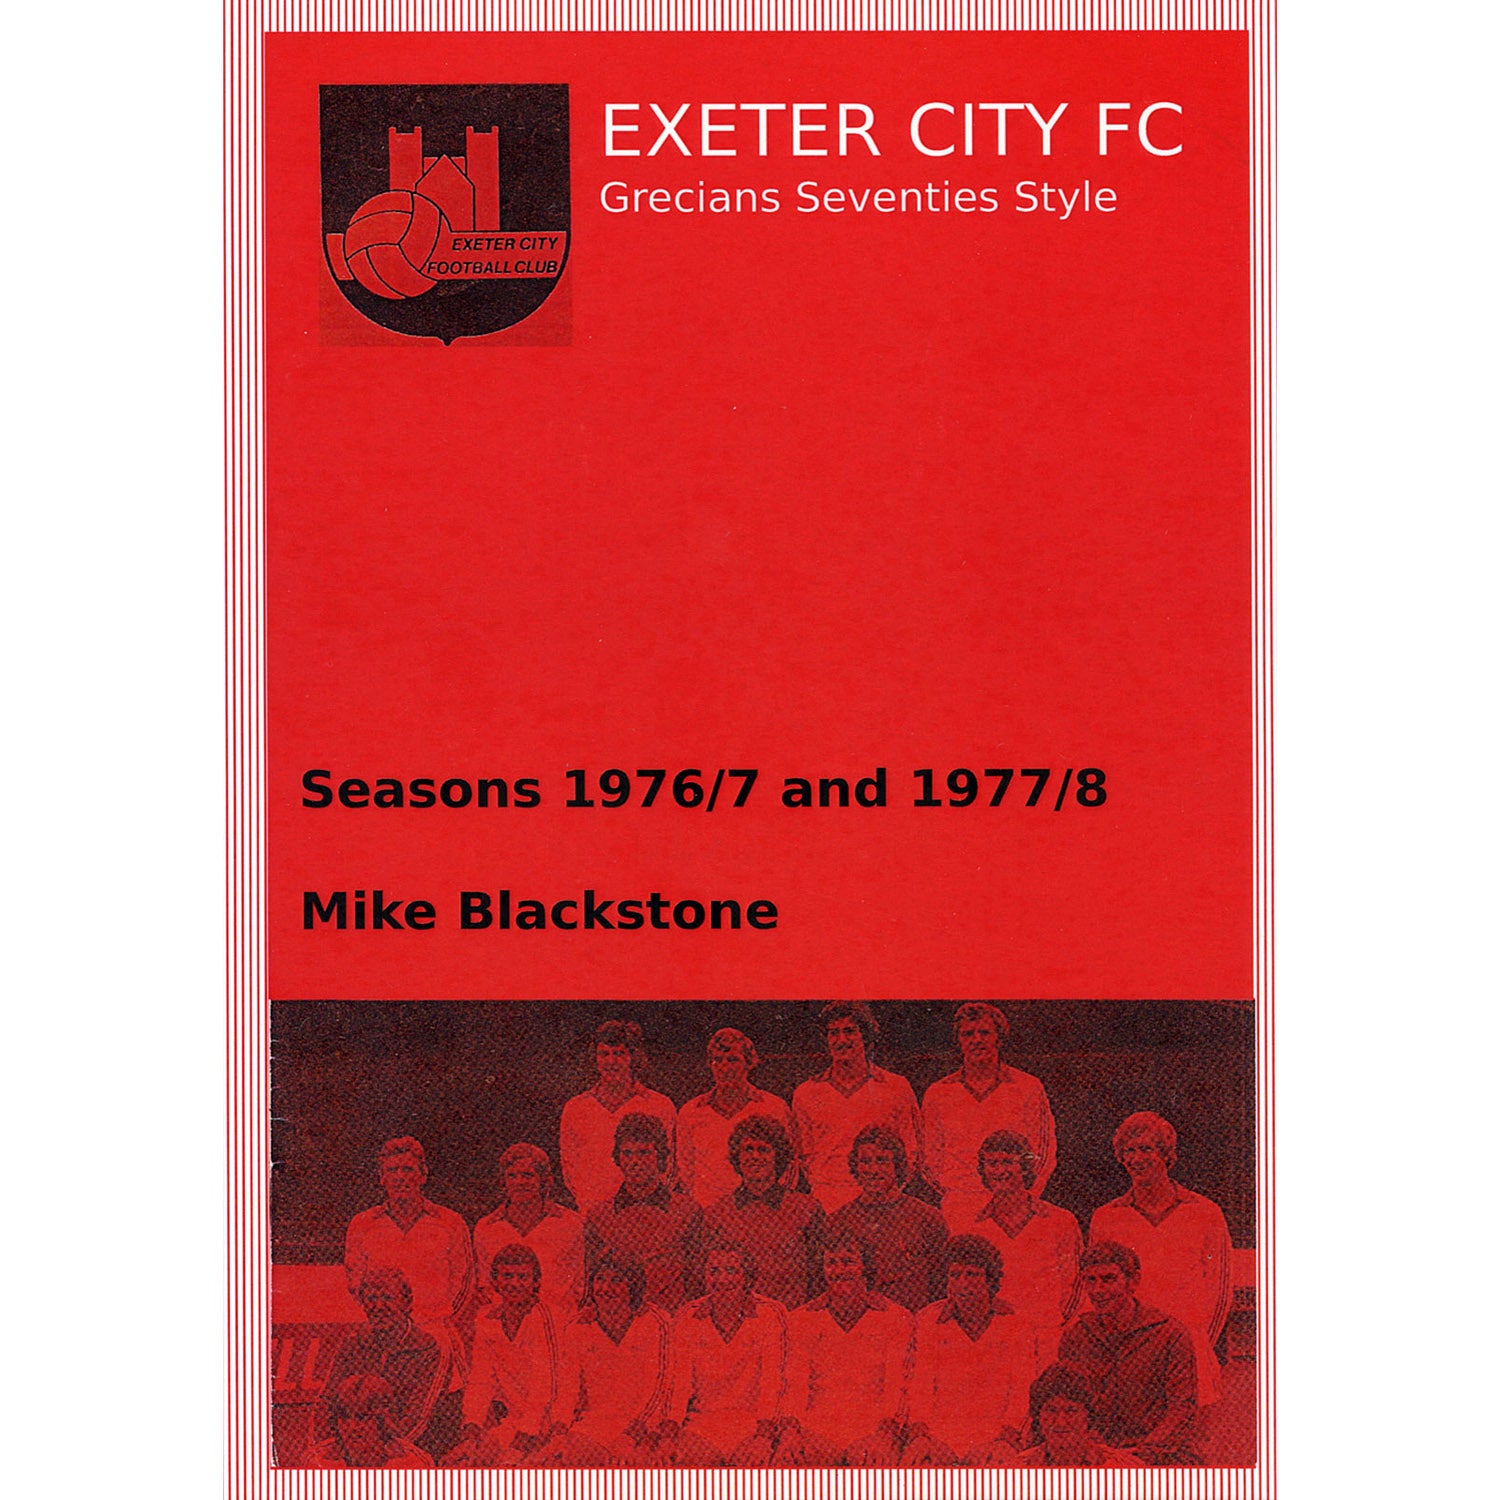 Exeter City FC – Grecians Seventies Style – Seasons 1976/7 and 1977/8